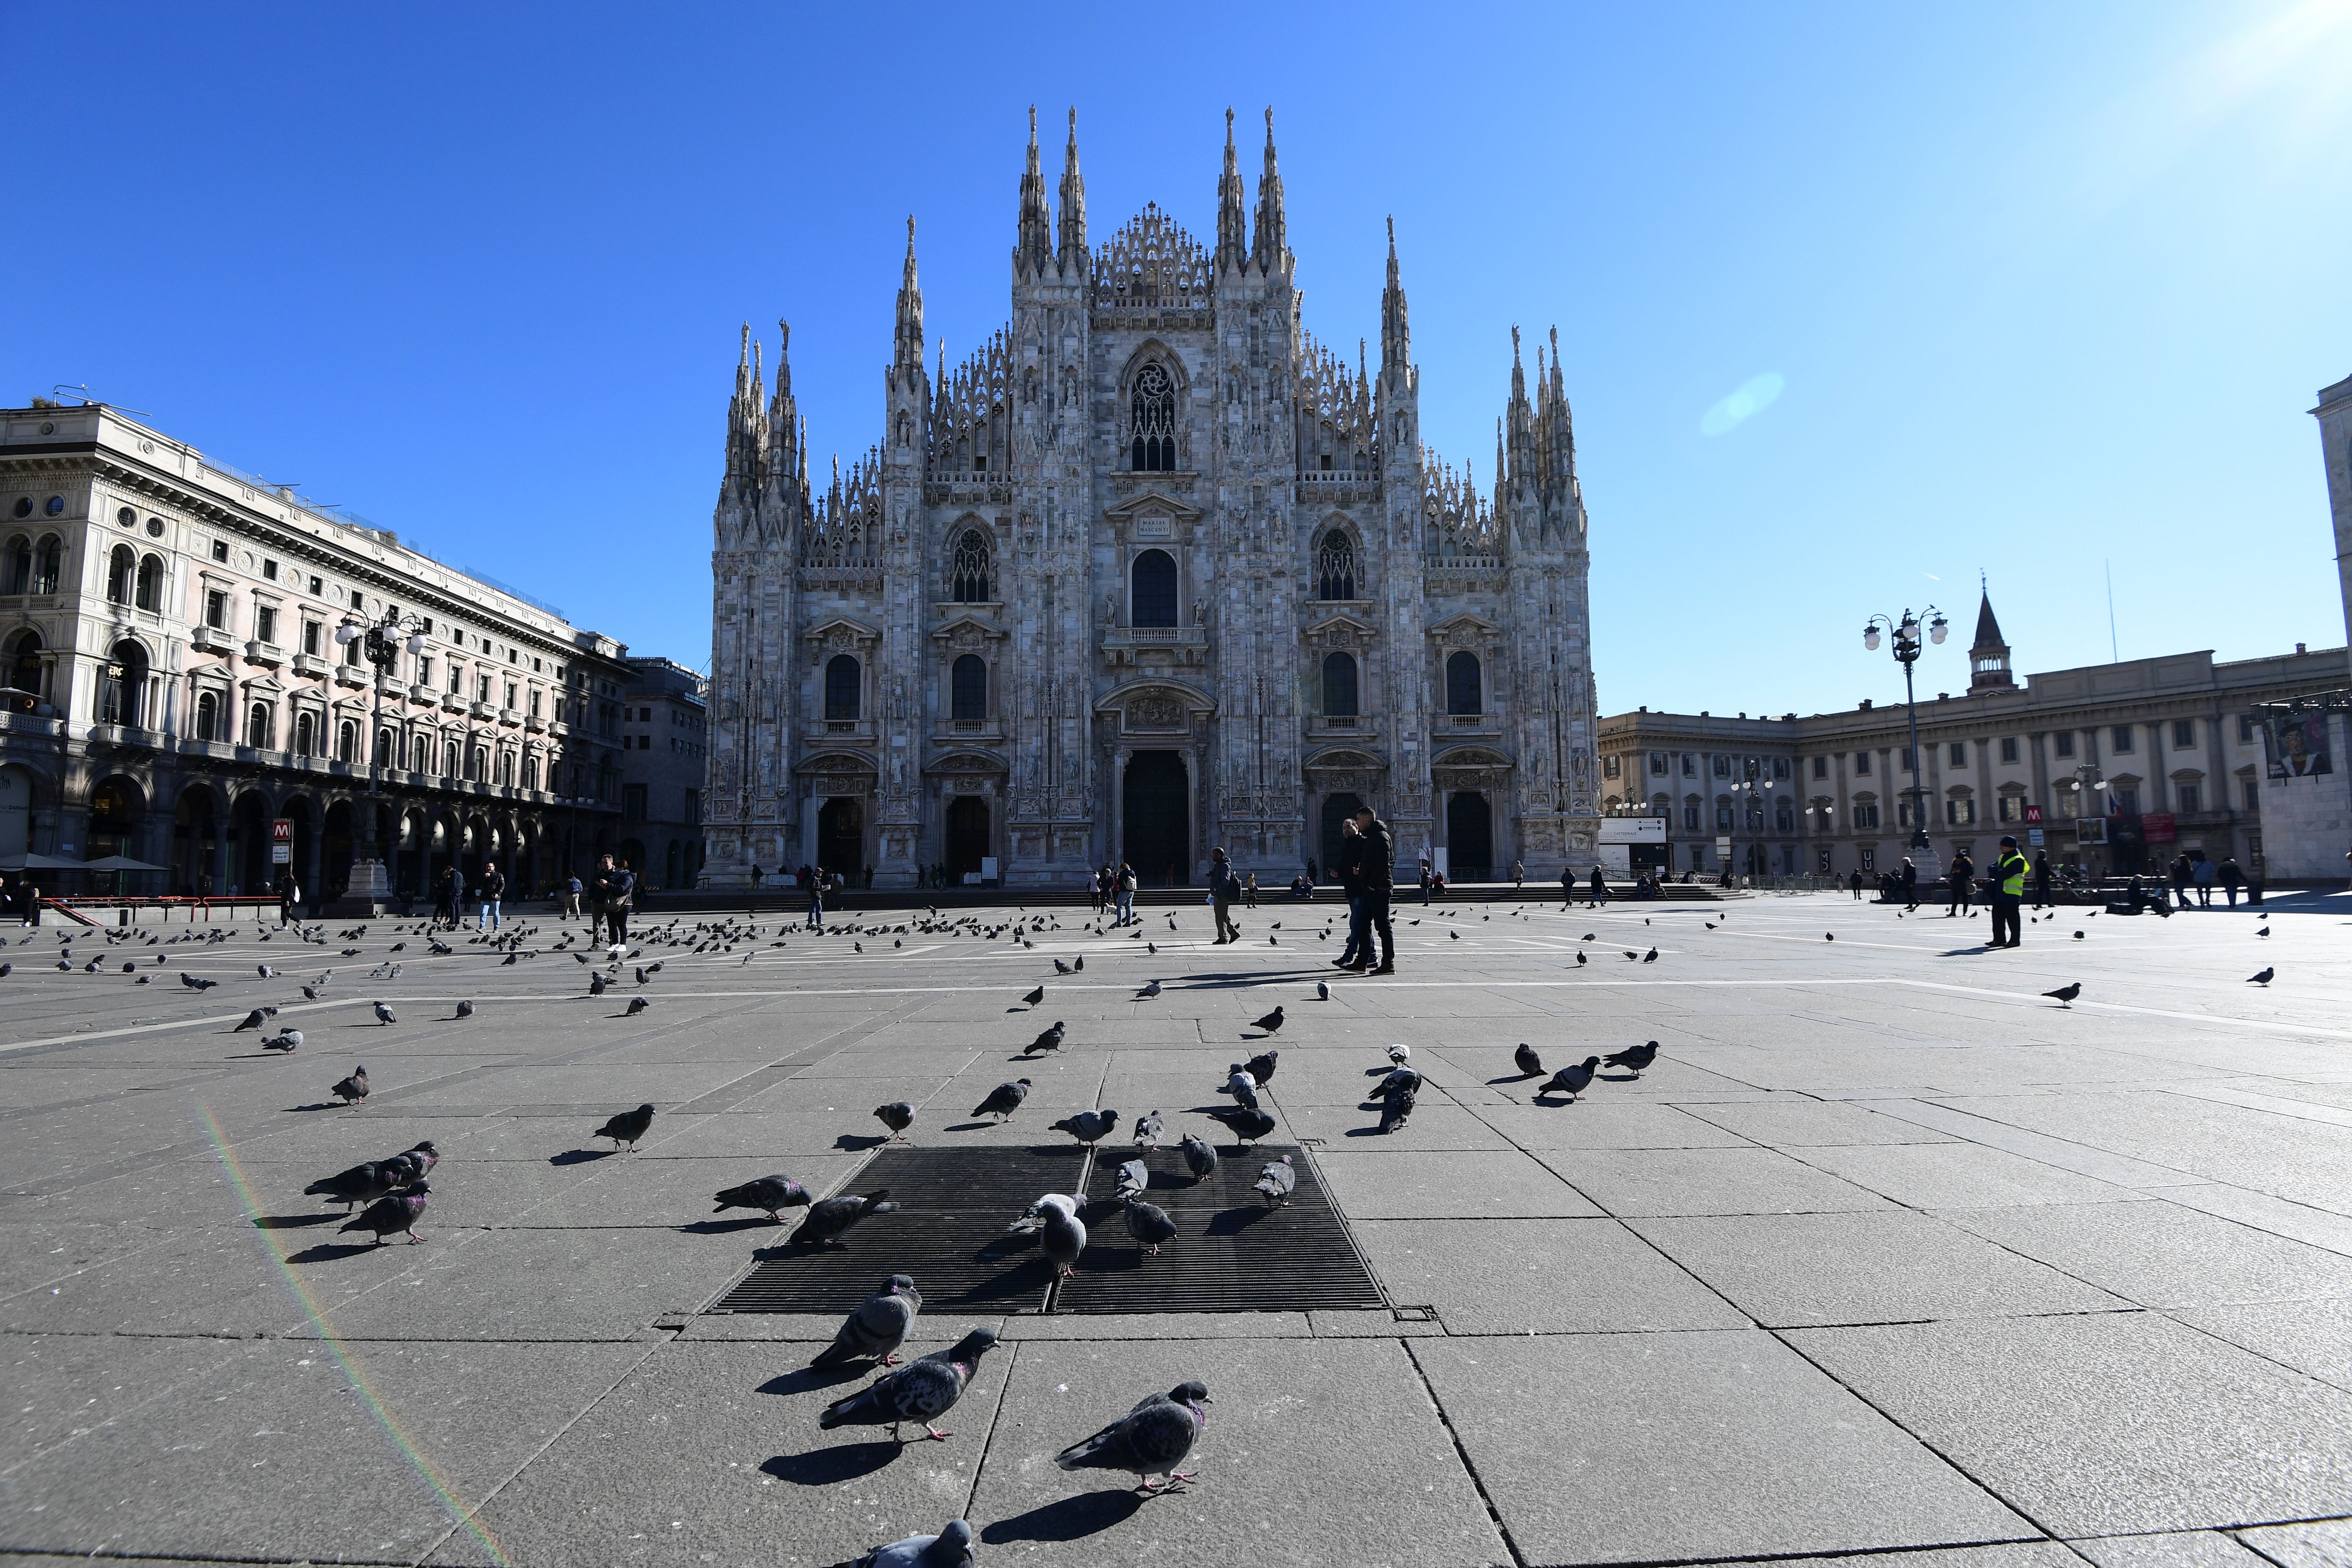 TOPSHOT - This picture taken on February 28, 2020, shows an almost empty piazza del Duomo in center Milan. - Since the Covid-19 outbreak in Italy, the epicenter of the virus in Europe, Milan is strongly hit by economic downturn, causing residents and business owners concern, AFP reports on February 29, 2020. (Photo by Miguel MEDINA / AFP) (Photo by MIGUEL MEDINA/AFP via Getty Images)